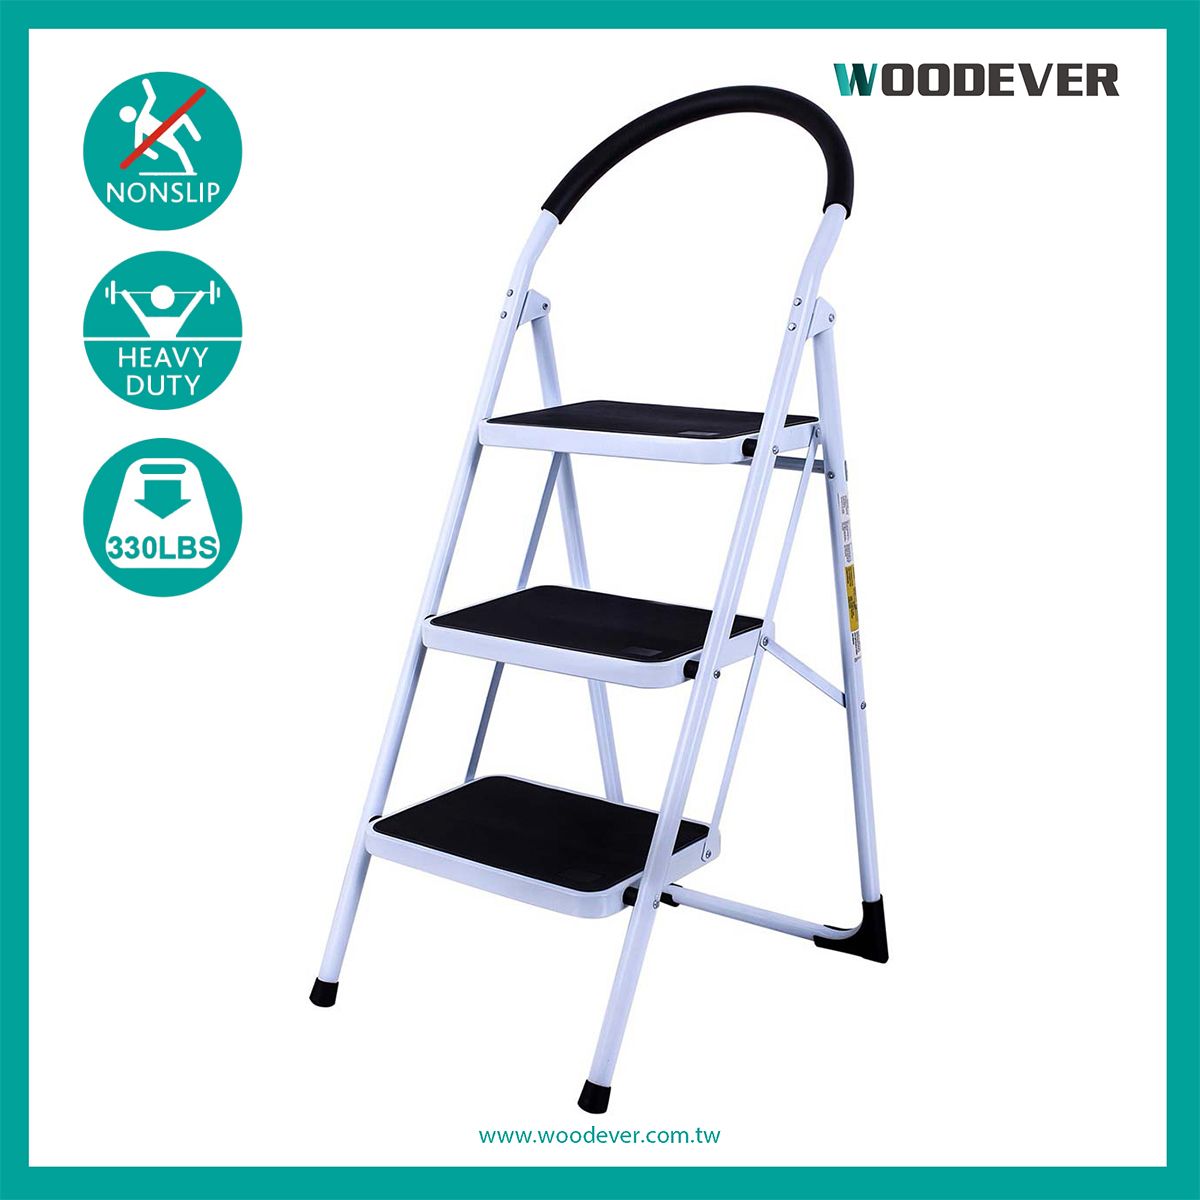 https://www.woodever.com.tw/zh-TW/product/330lbs-/household_Ladder-WEHR-3S-01.html